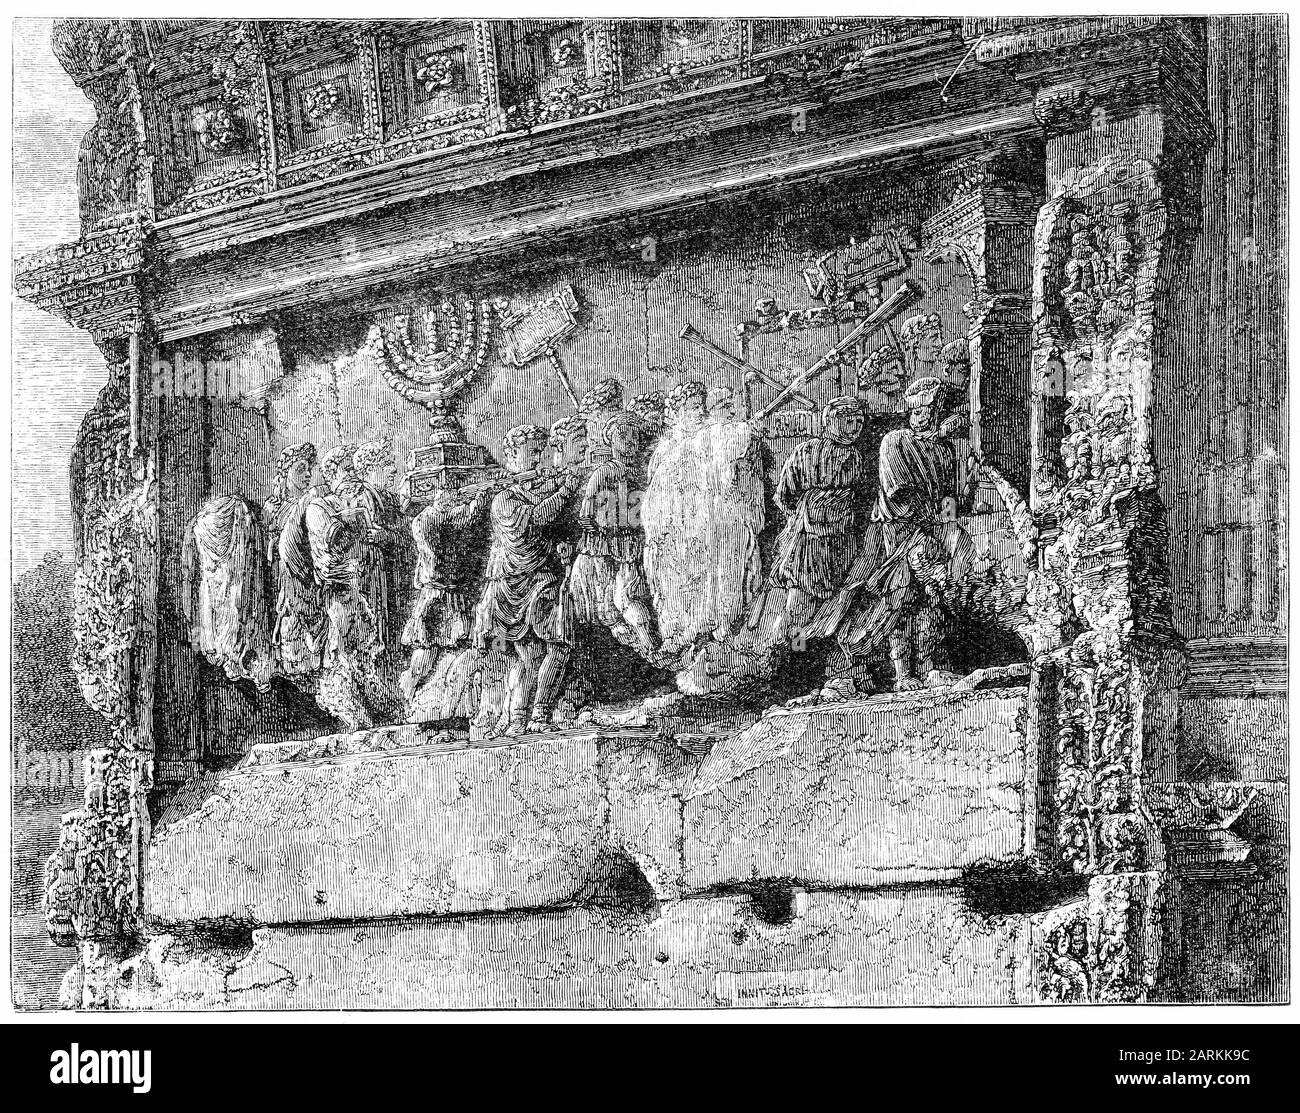 Engraving of the Roman's record of the destruction of Jerusalem carved into the Arch of Titus, showing soldiers carrying off sacred objects from Herod's Temple - the candlestick, table of shewbread and trumpet. Stock Photo